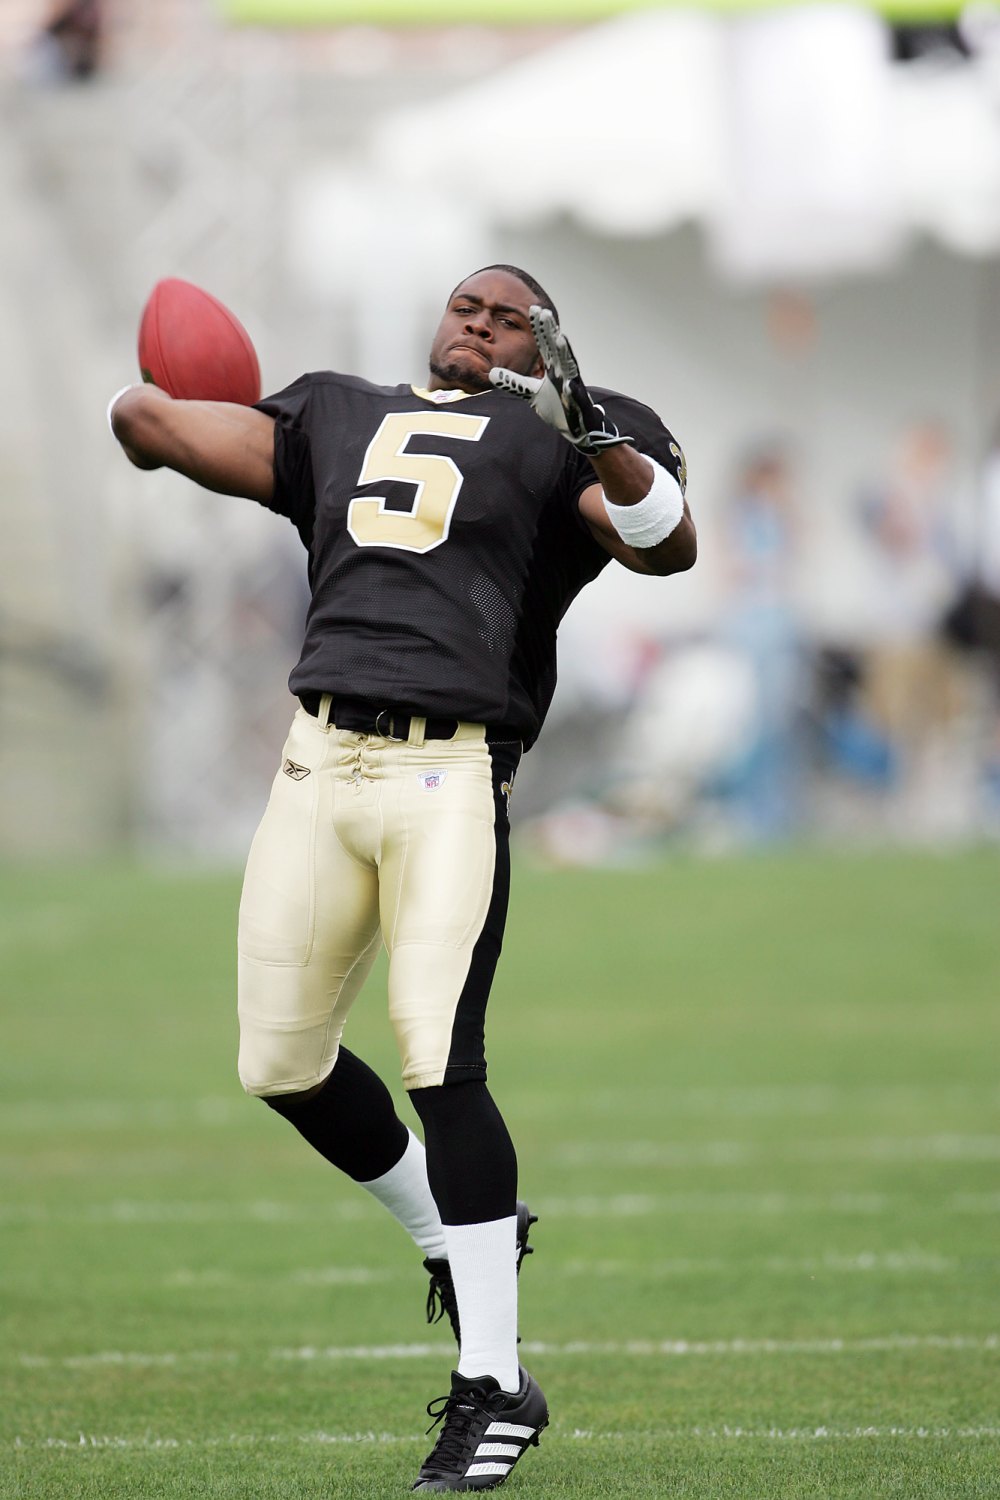 Reggie Bush had suicidal thoughts before the New Orleans draft